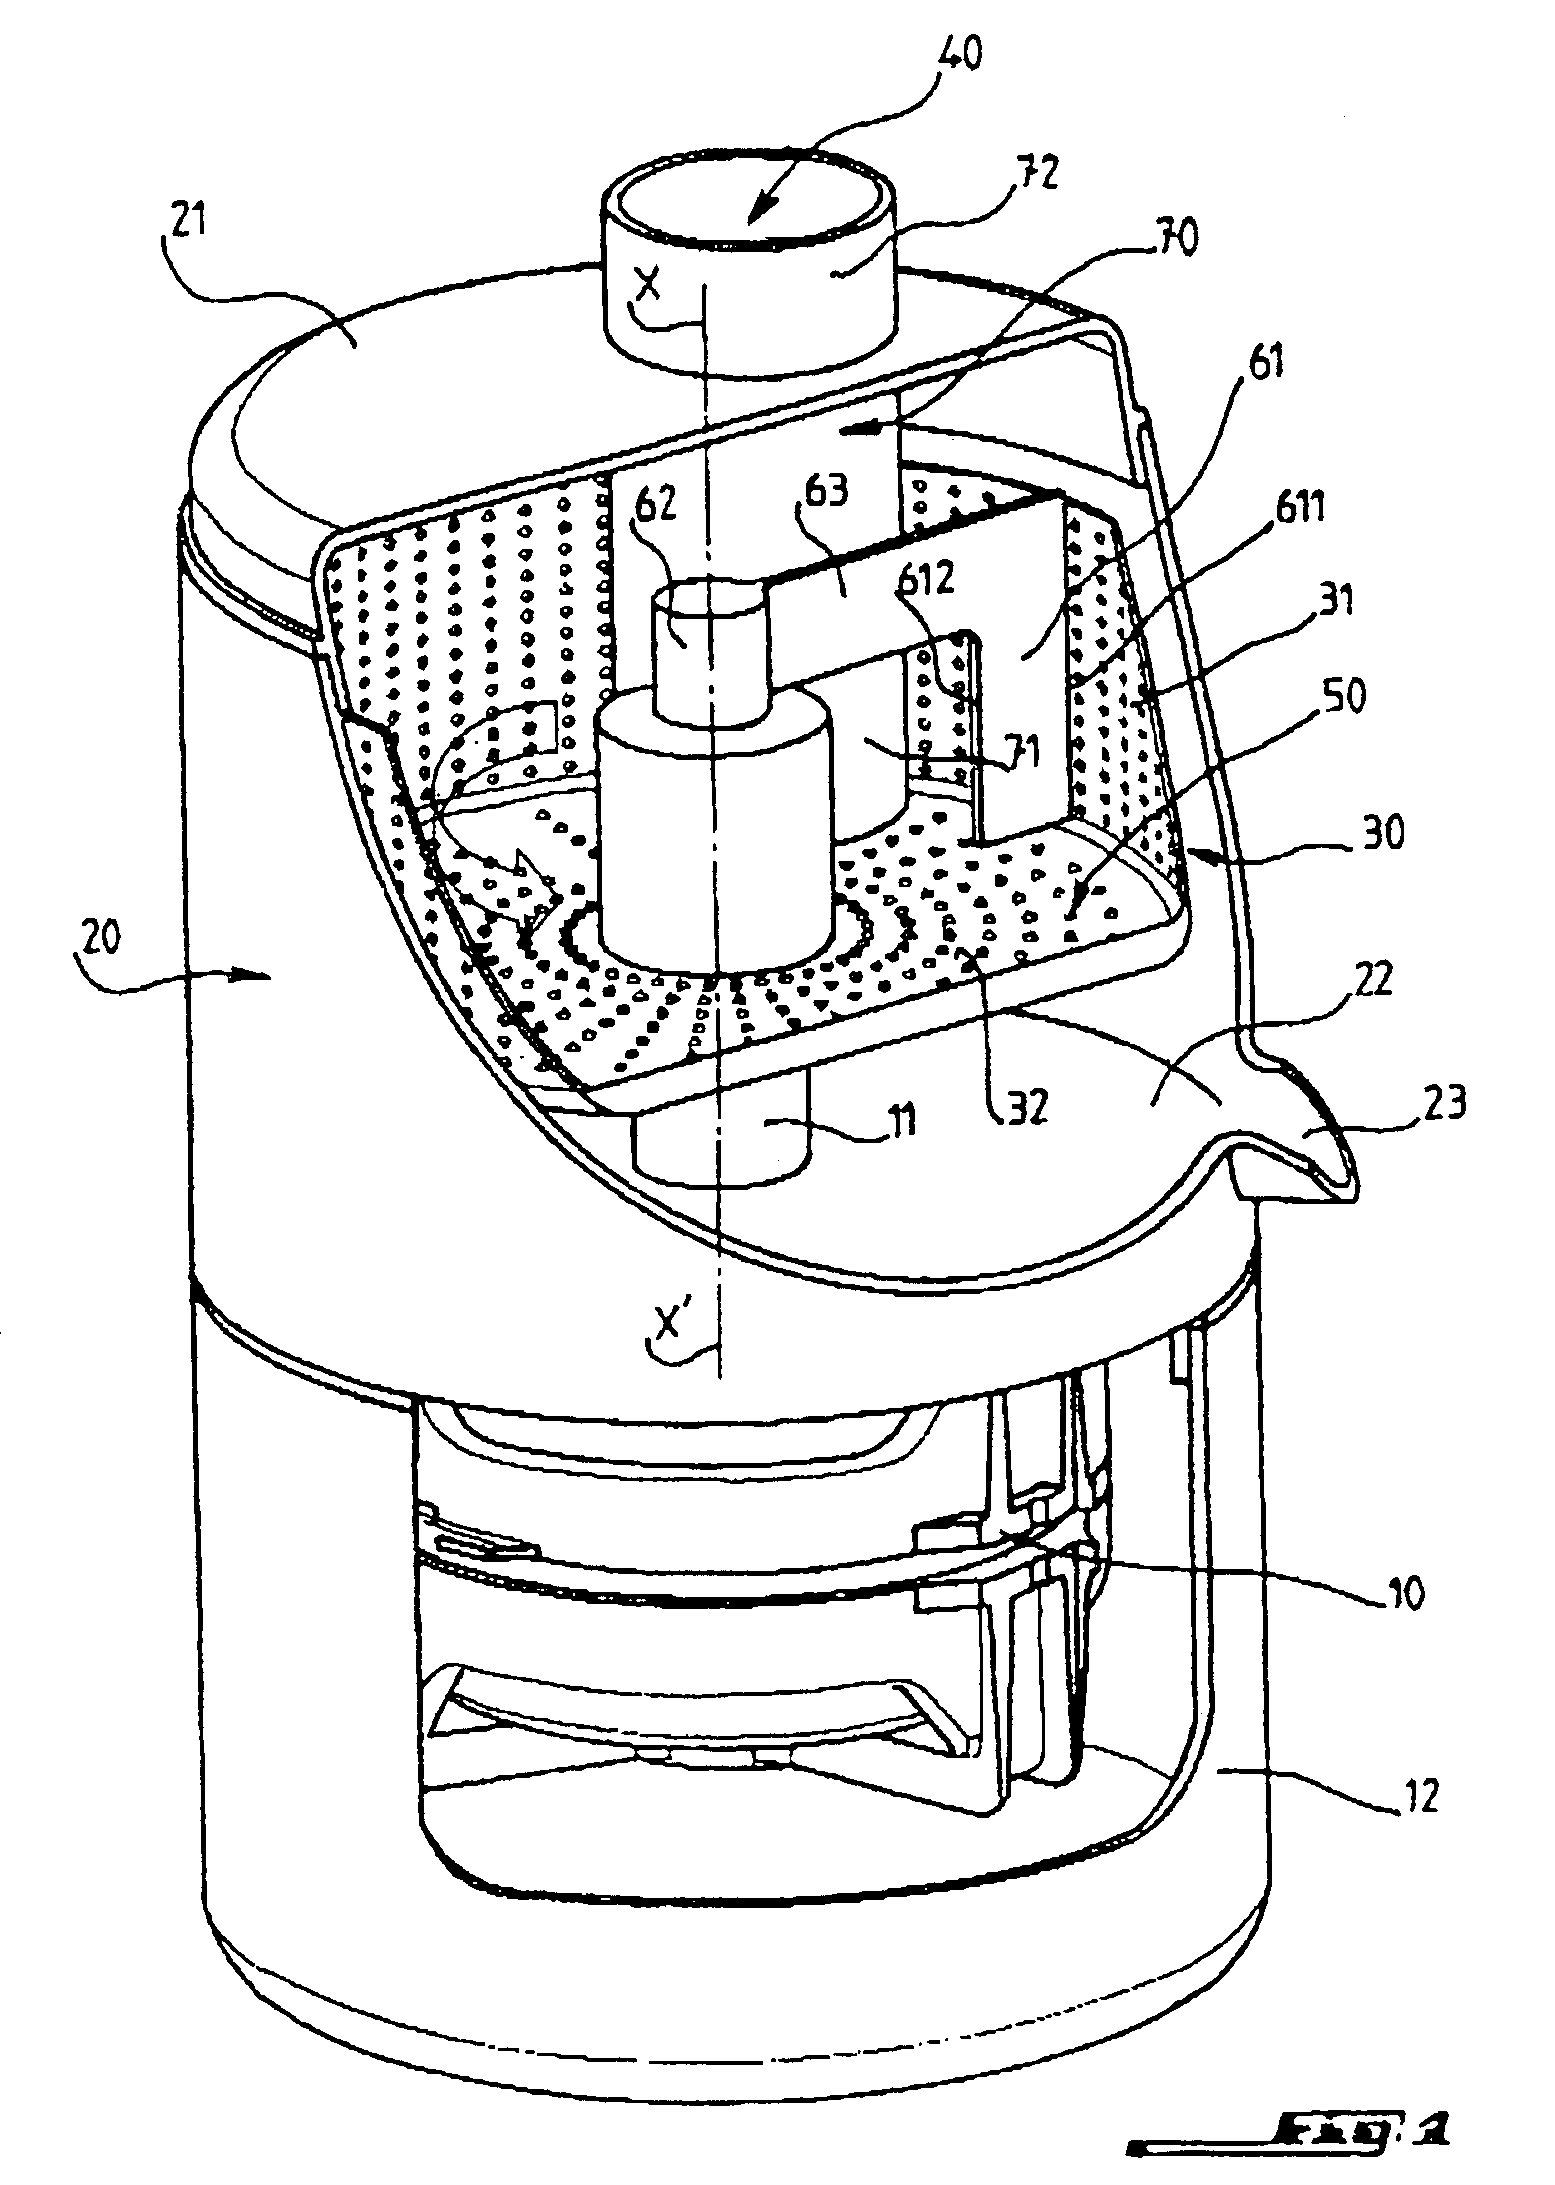 Apparatus for extraction of juice and pulp from plant products